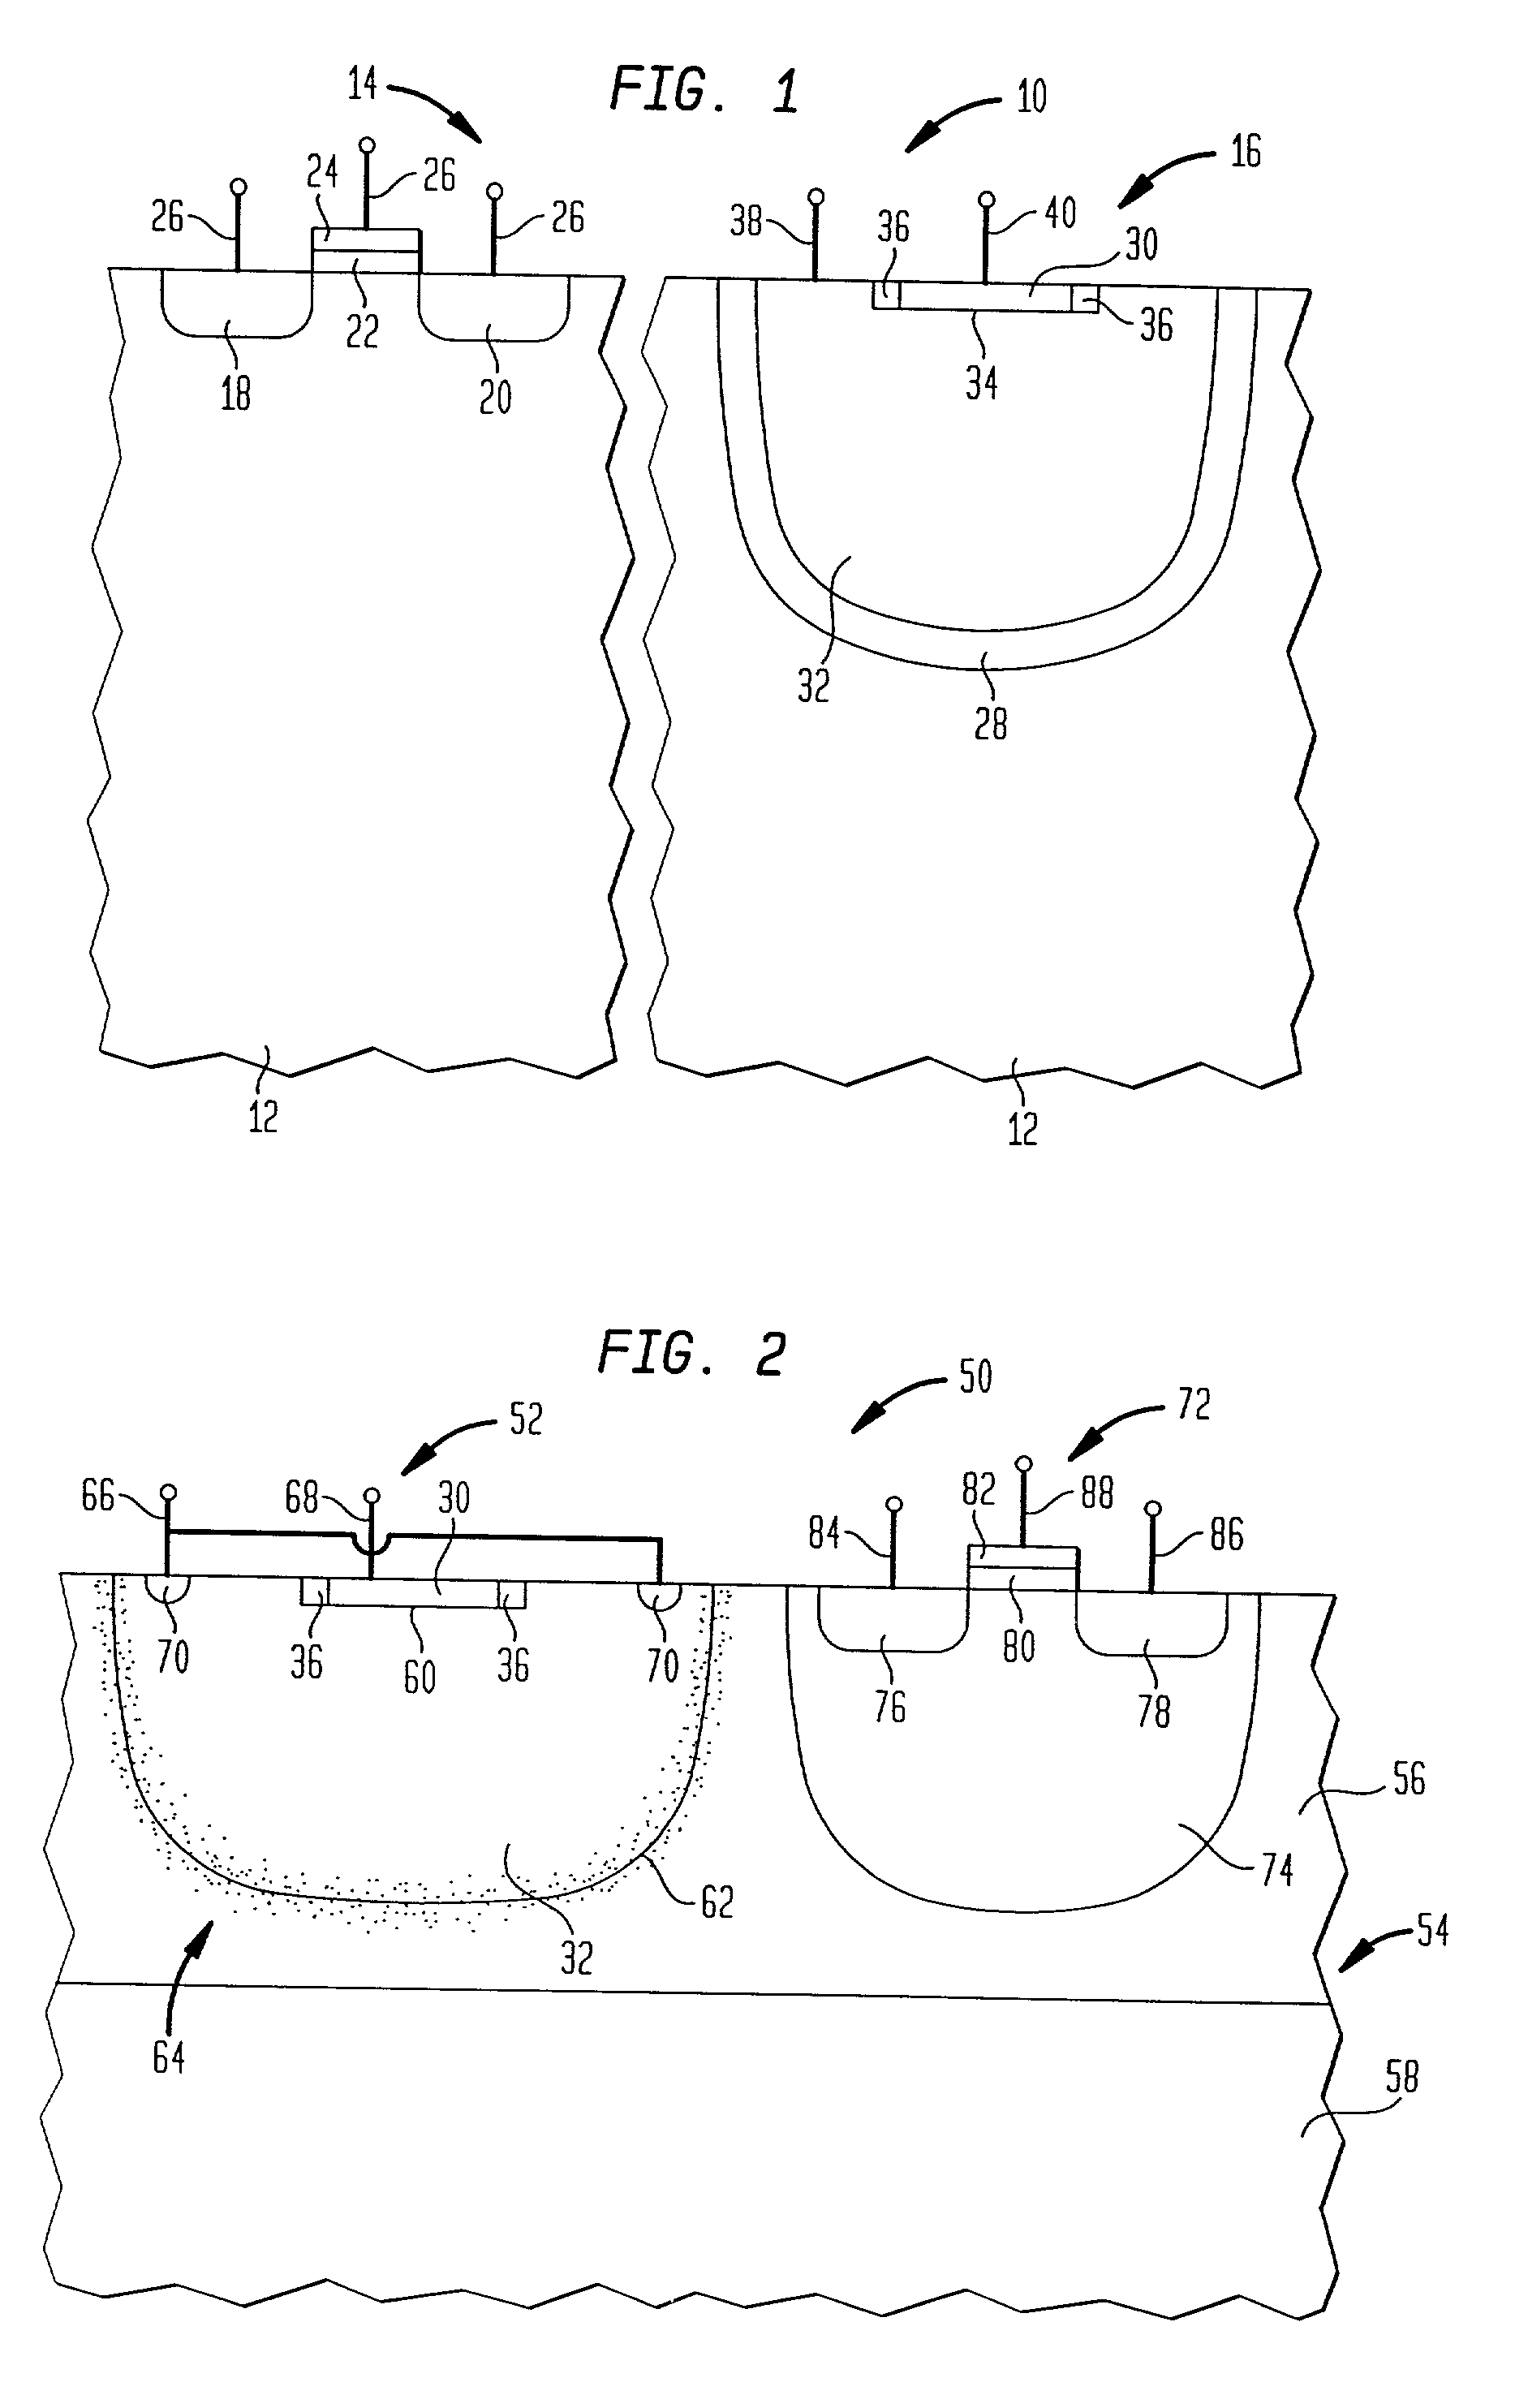 Integrated optoelectronic device with an avalanche photodetector and method of making the same using commercial CMOS processes